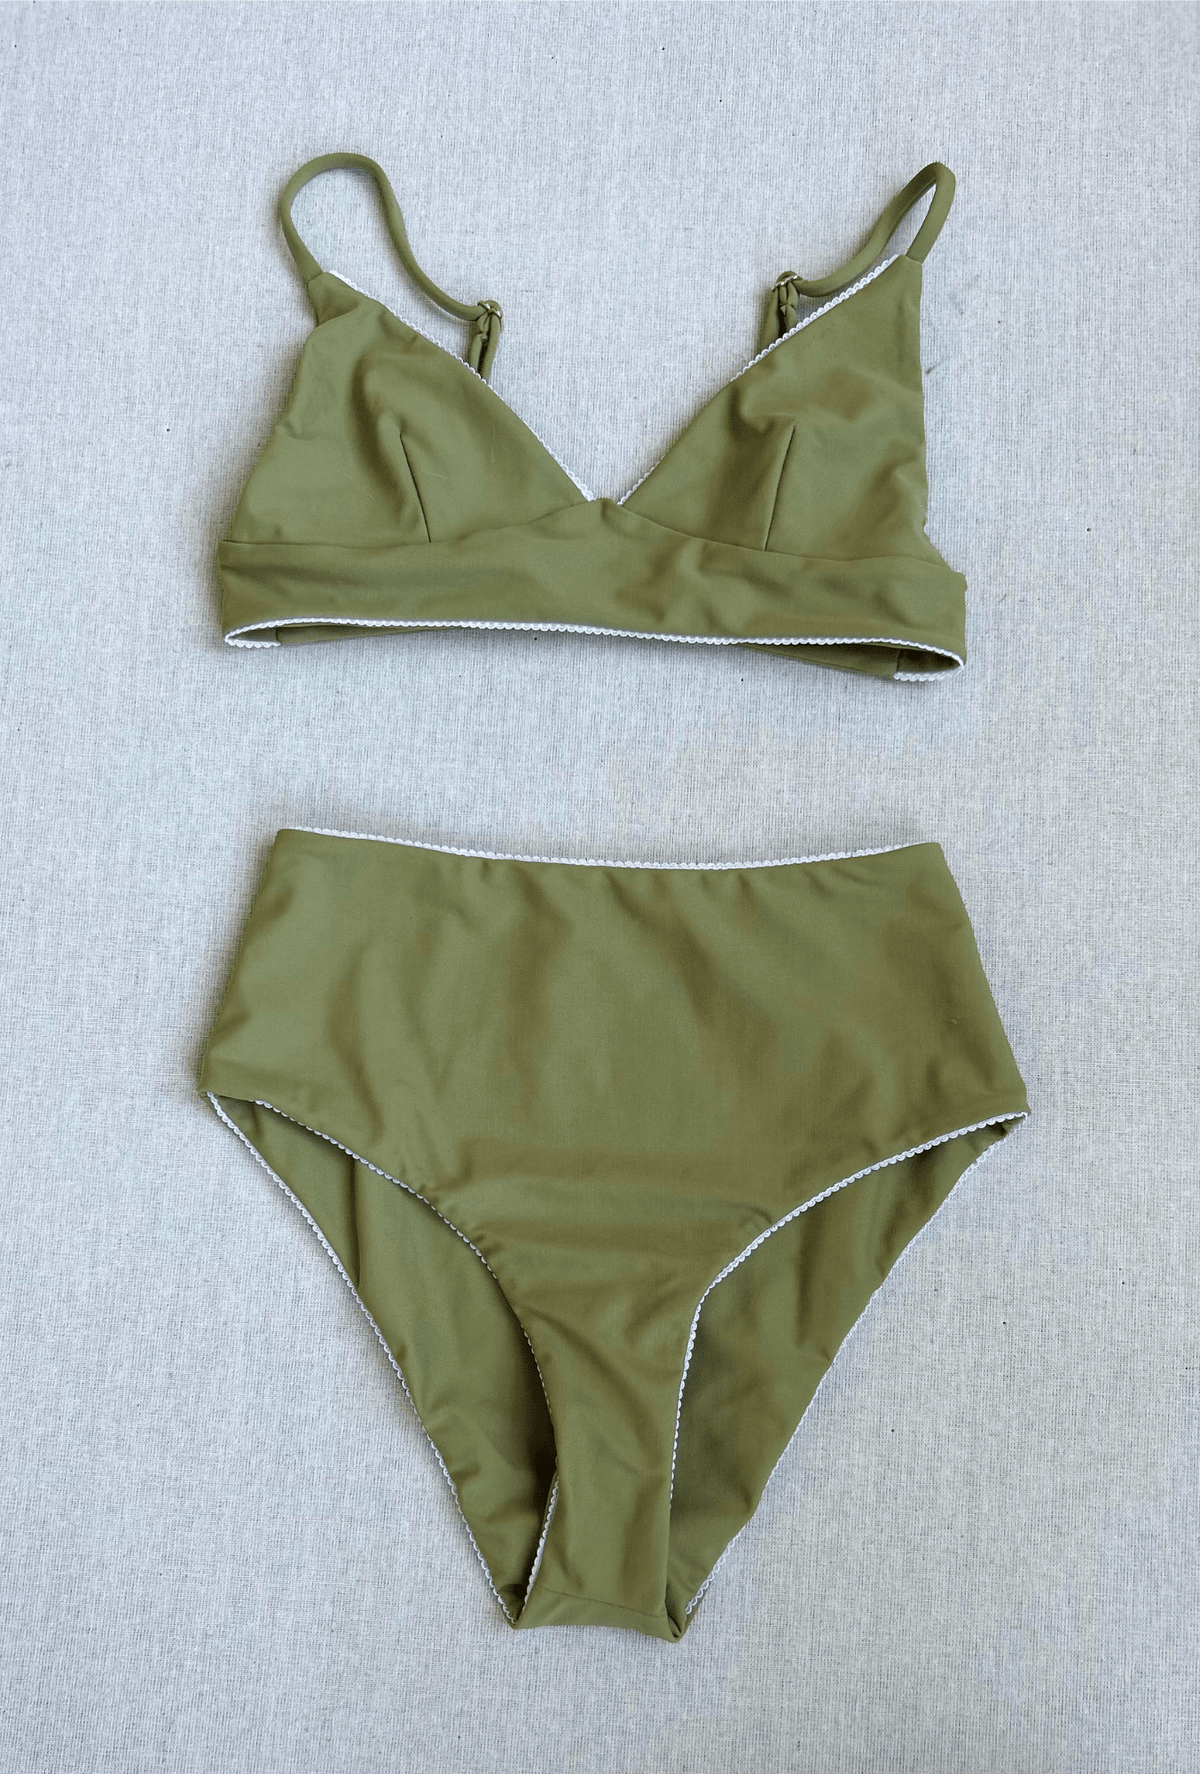 rhodes top / isla bottom in olive with lace trim - size xs